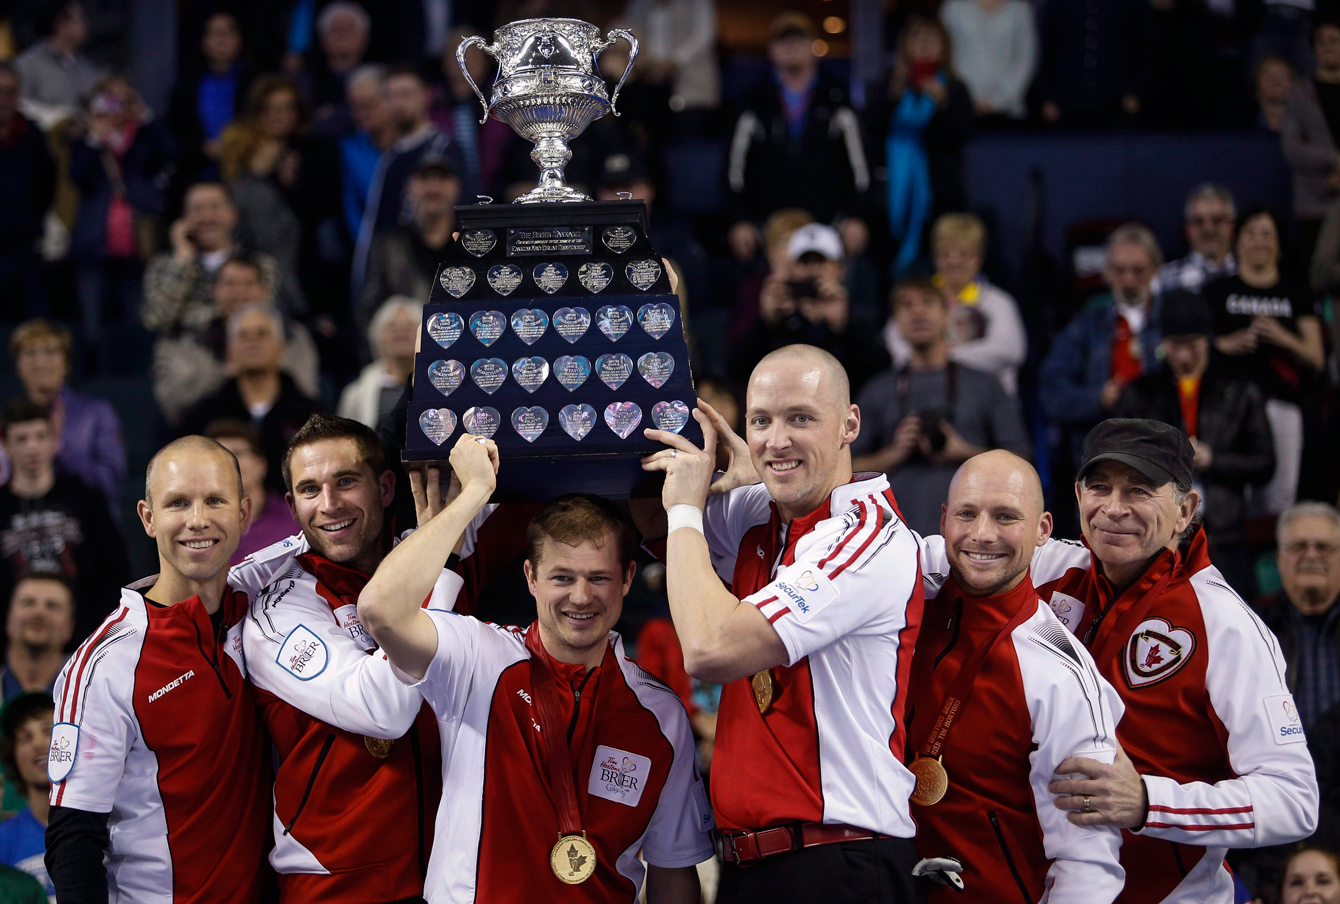 Team Canada skip Pat Simmons, left to right, third John Morris, second Carter Rycroft, lead Nolan Thiessen, alternate Tom Sallows, and coach Earl Morris, lift the Brier Tankard after defeating Northern Ontario to win the gold medal game at the Brier in Calgary on Sunday, March 8, 2015. (Photo: CP/Jeff McIntosh)